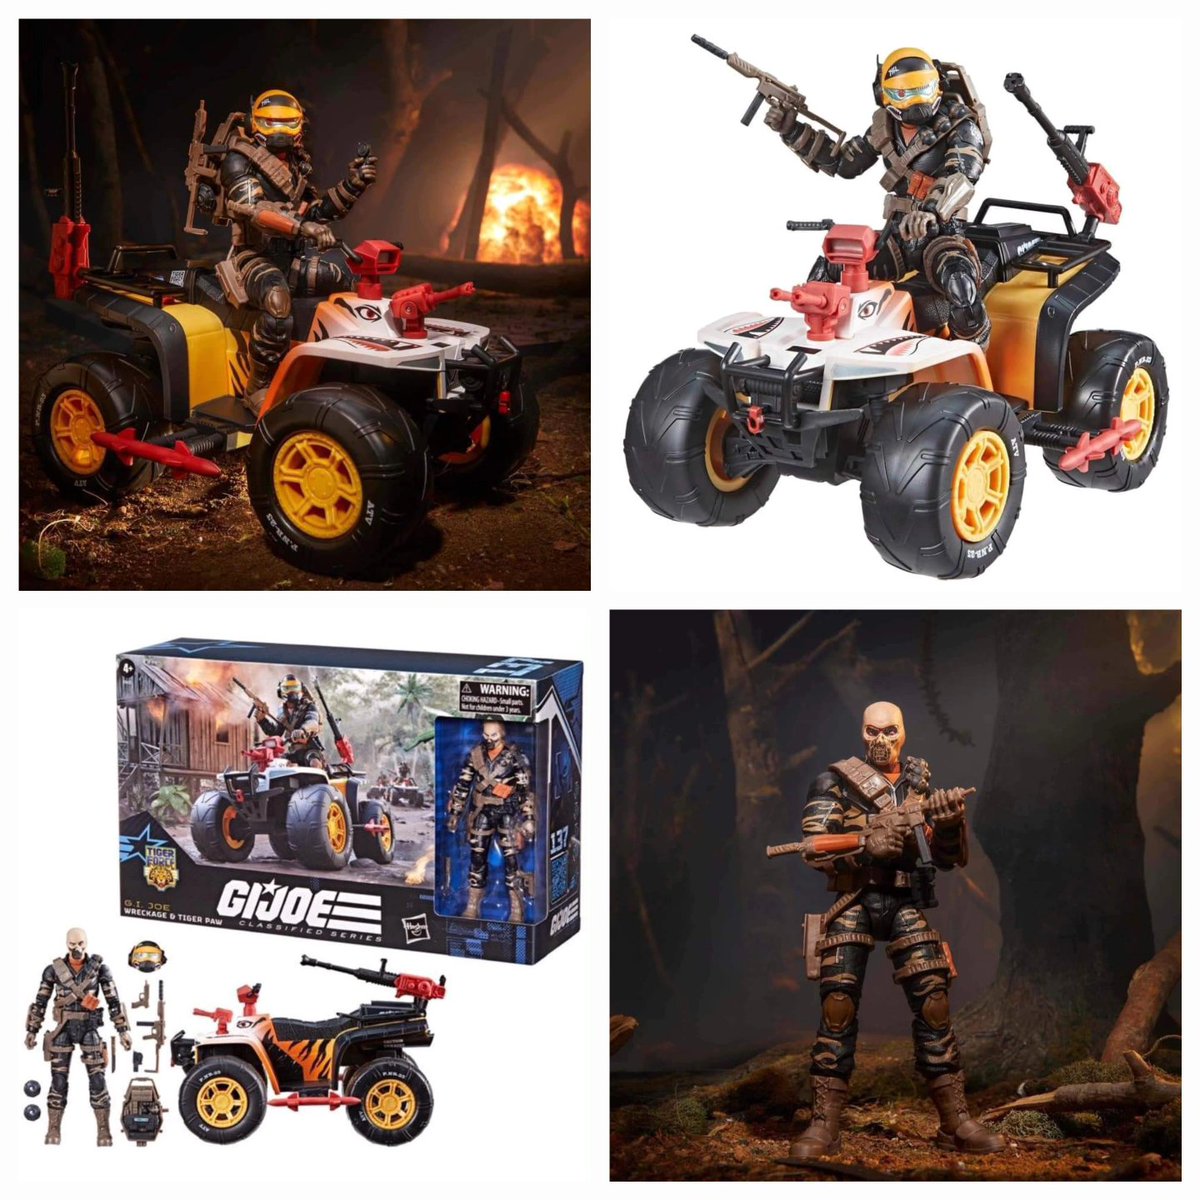 💥#UPDATE'D ALERT (sold out)💥 #Statoversians! 👁🌛👁 🫶 Hasbro G.I. Joe Classified Series 6' Tiger Force Wreckage & Tiger Paw ATV is NOW up for preorder at Hasbro Pulse for Pulse Premium Members for ONLY ($54.99)! #yojoe #Gijoe #toynews TSO'VIN!! hasbropulse.com/products/g-i-j…